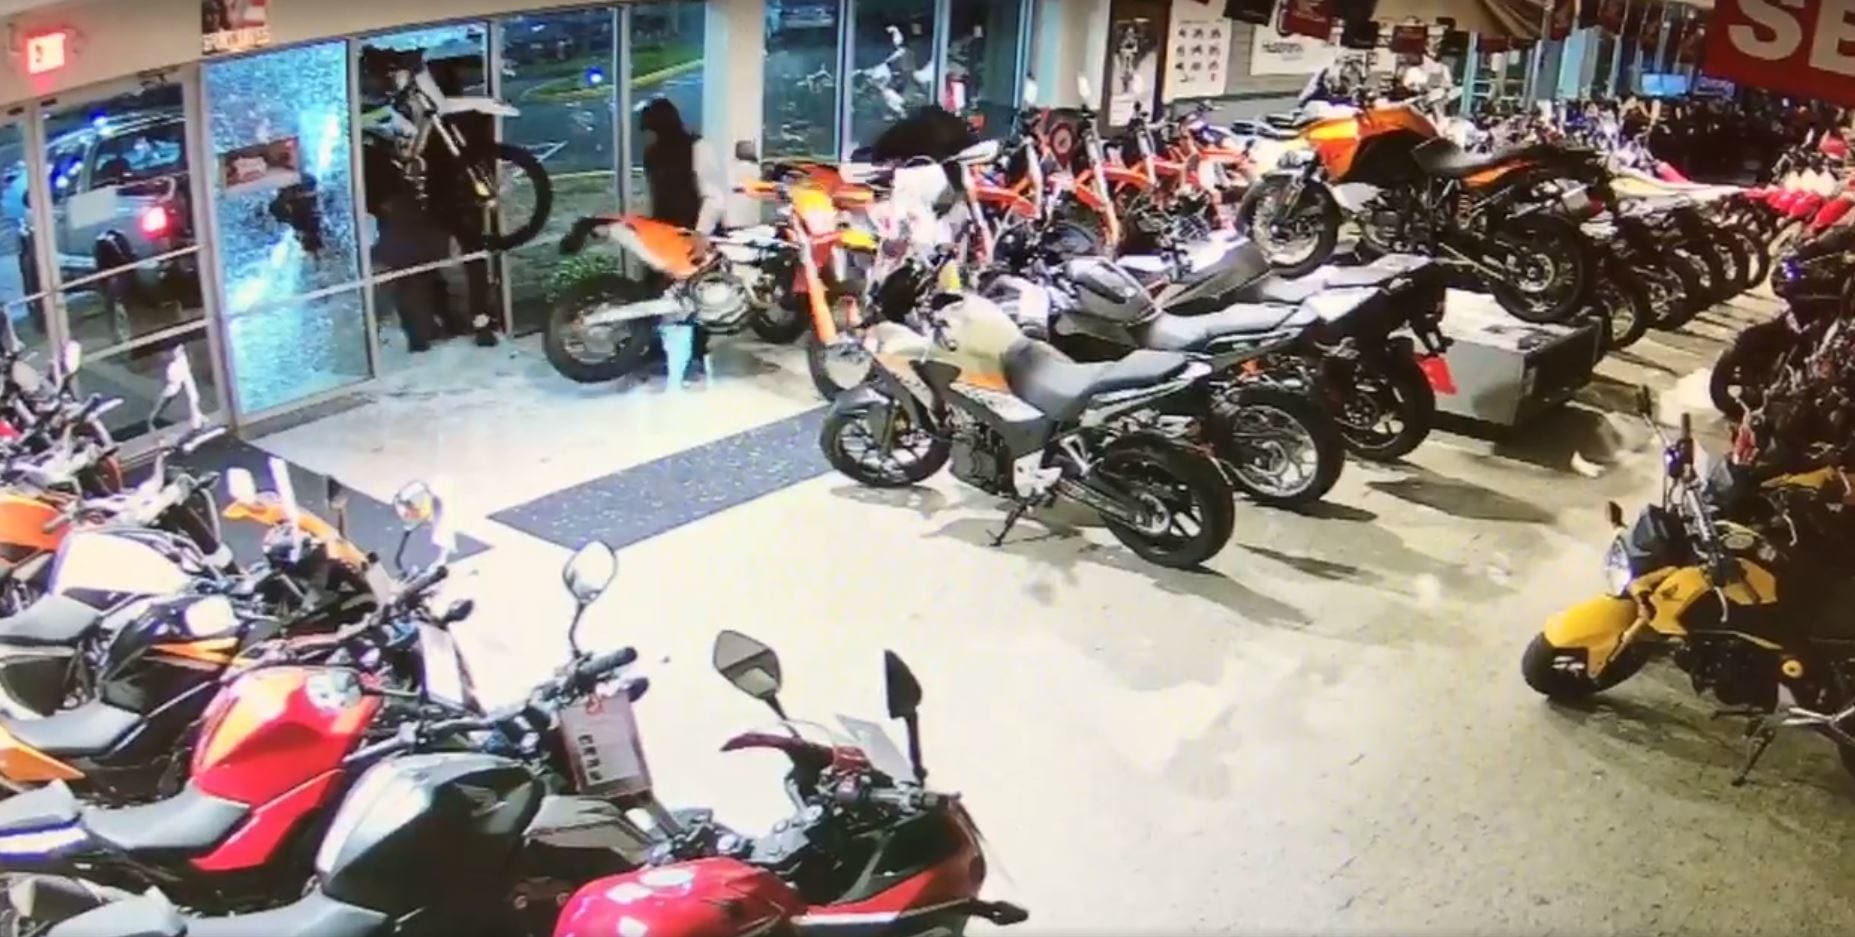 Manchester Powersports Dealership Robbed of 3 Motorcycles